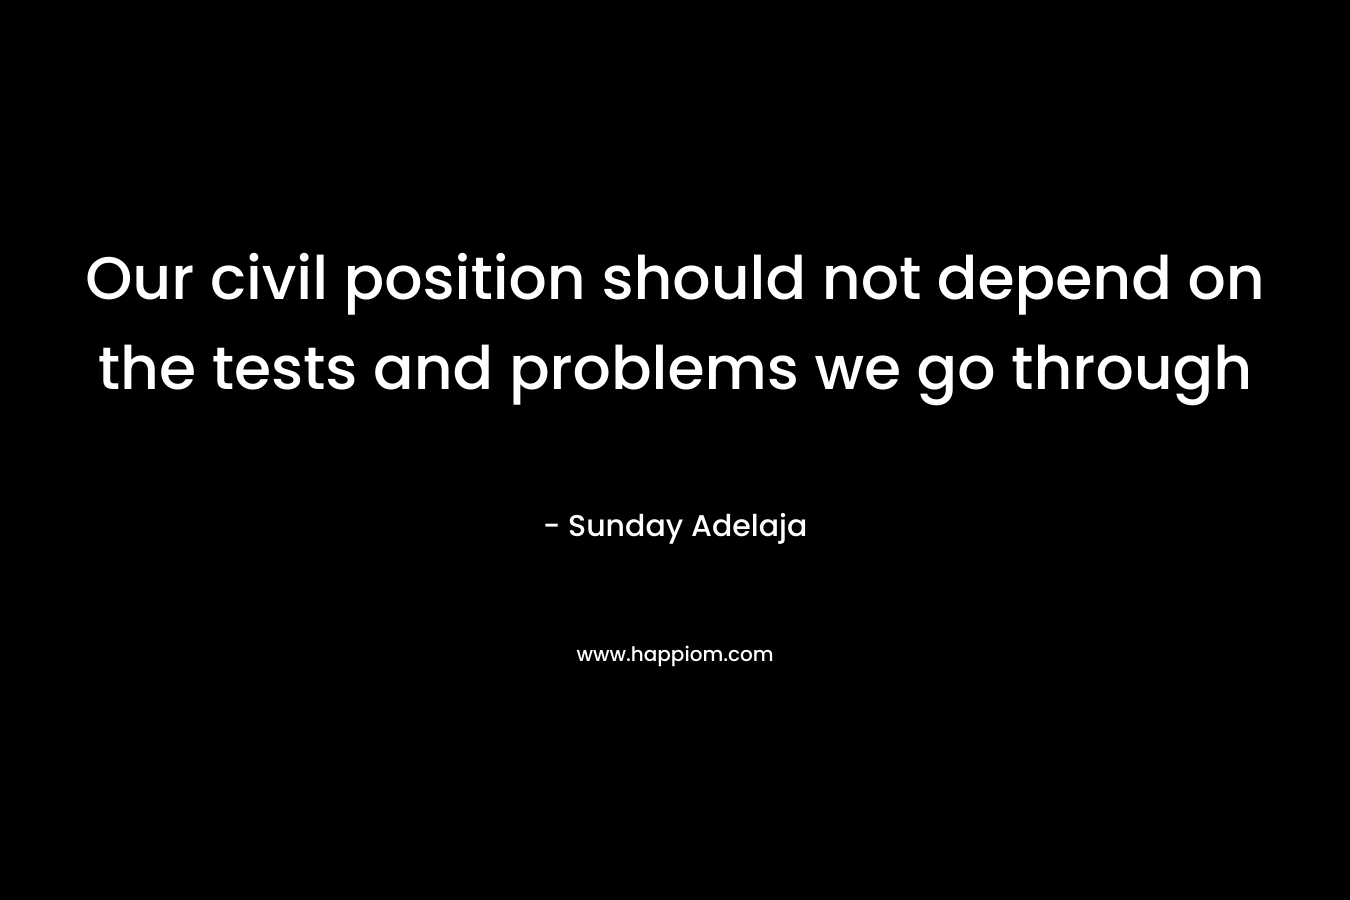 Our civil position should not depend on the tests and problems we go through